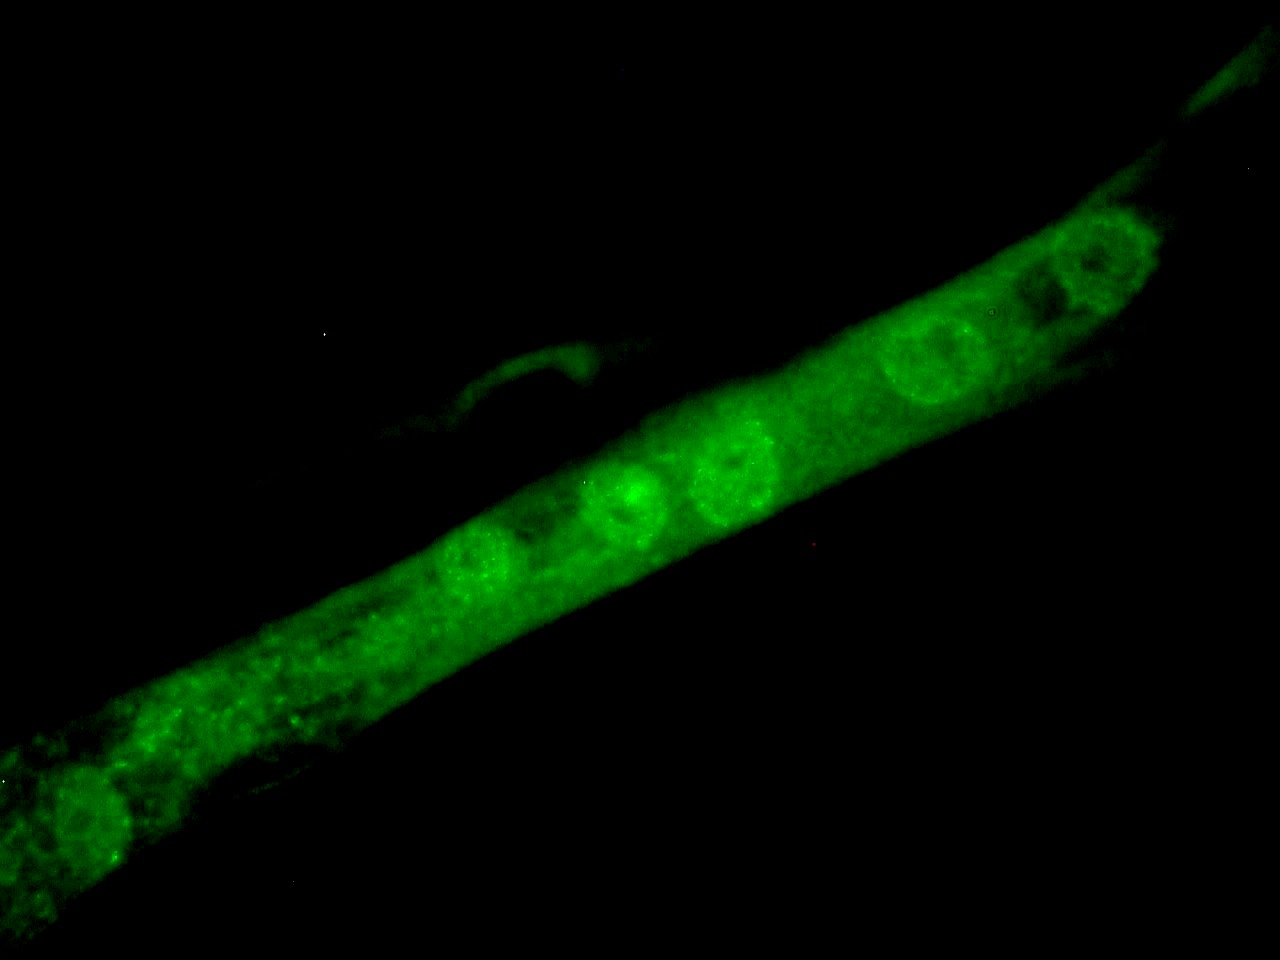 Figure 3. MyoD1 immunostaining of nuclei in MyoD1 transfected cells induced to undergo muscle cell differentiation.